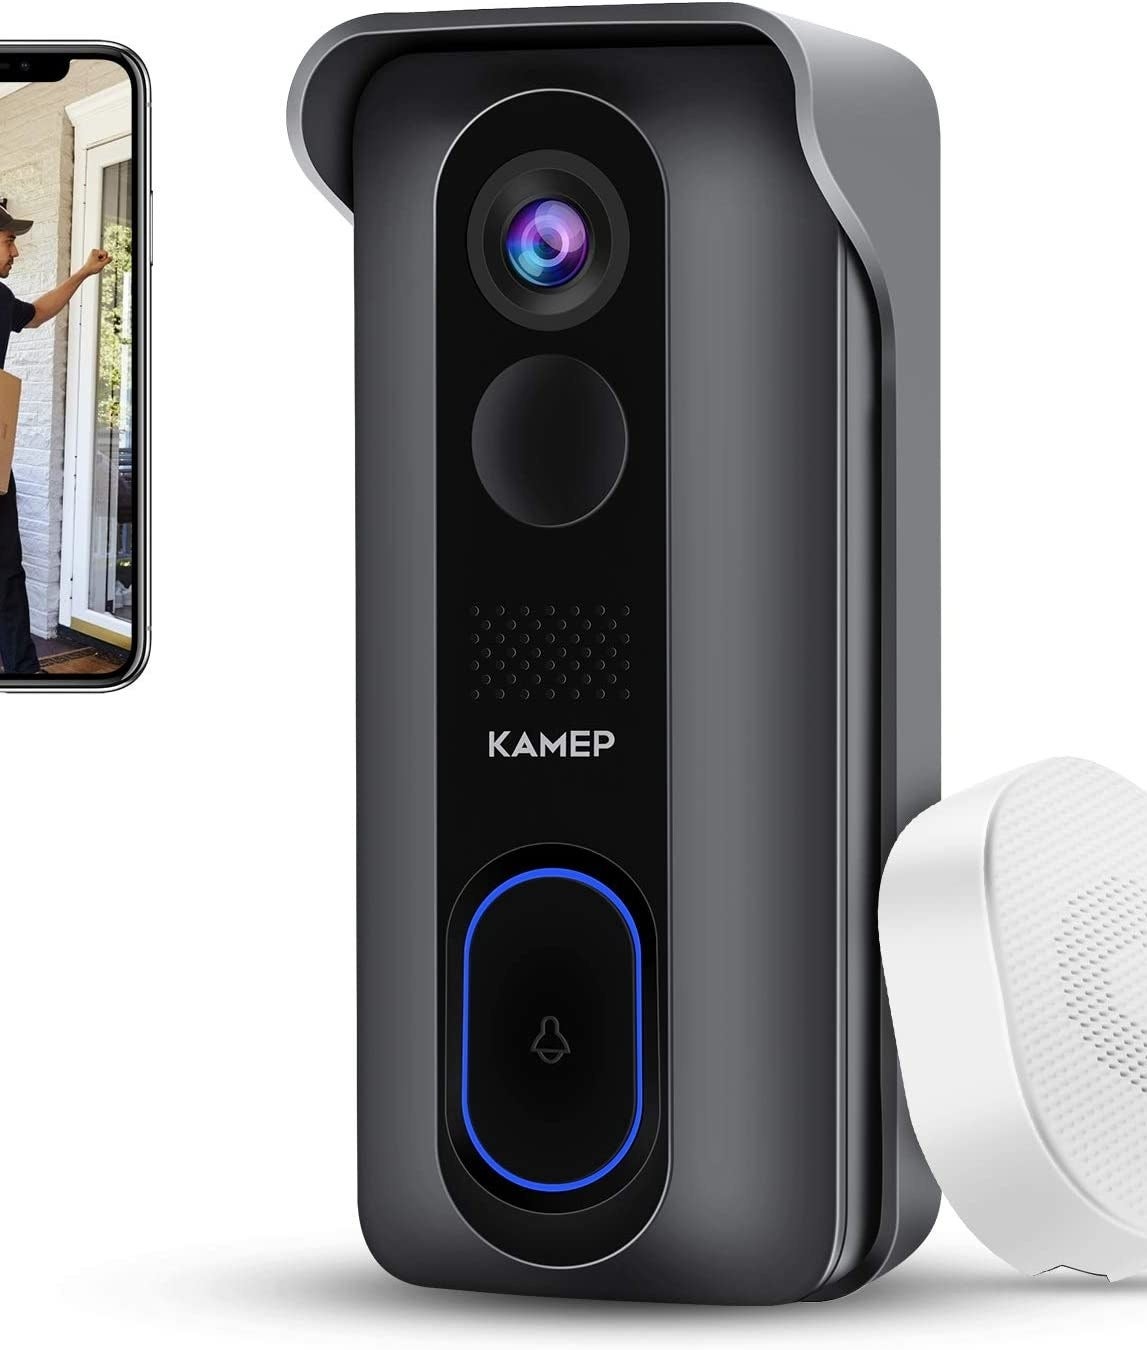 the doorbell camera next to a phone on a white background